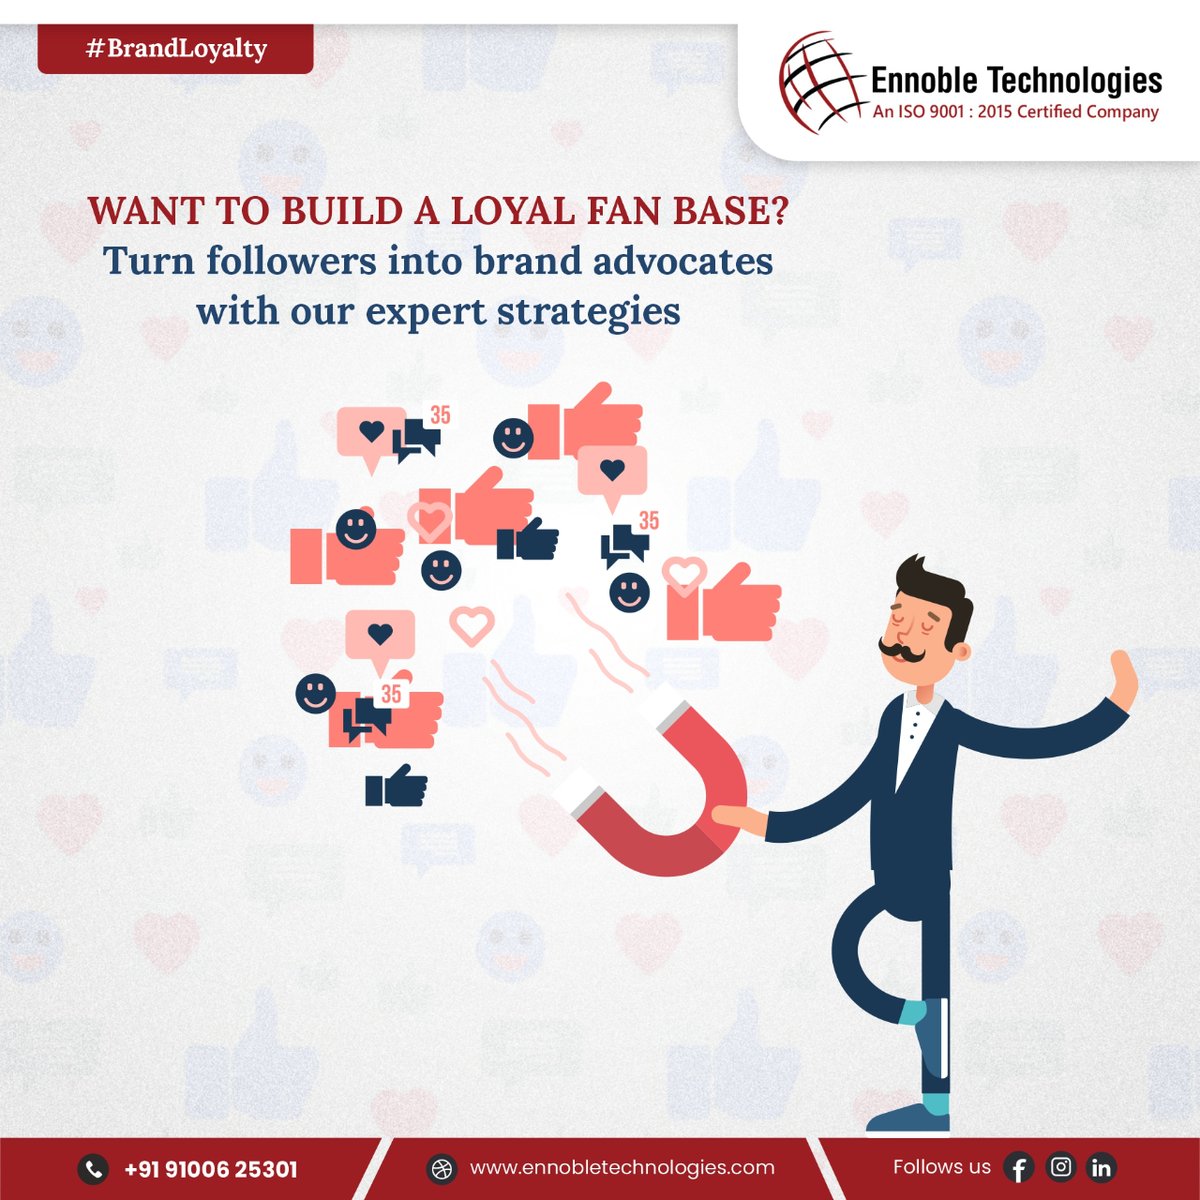 🌟Want to Build a Loyal Fan Base?🌟

Turn followers into brand advocates with our expert strategies. #EnnobleTechnologies fosters meaningful connections with your audience to build brand loyalty.

📧Email us: info@ennobletechnologies.com

#FanBaseBuilding #EnnobleTechnologies